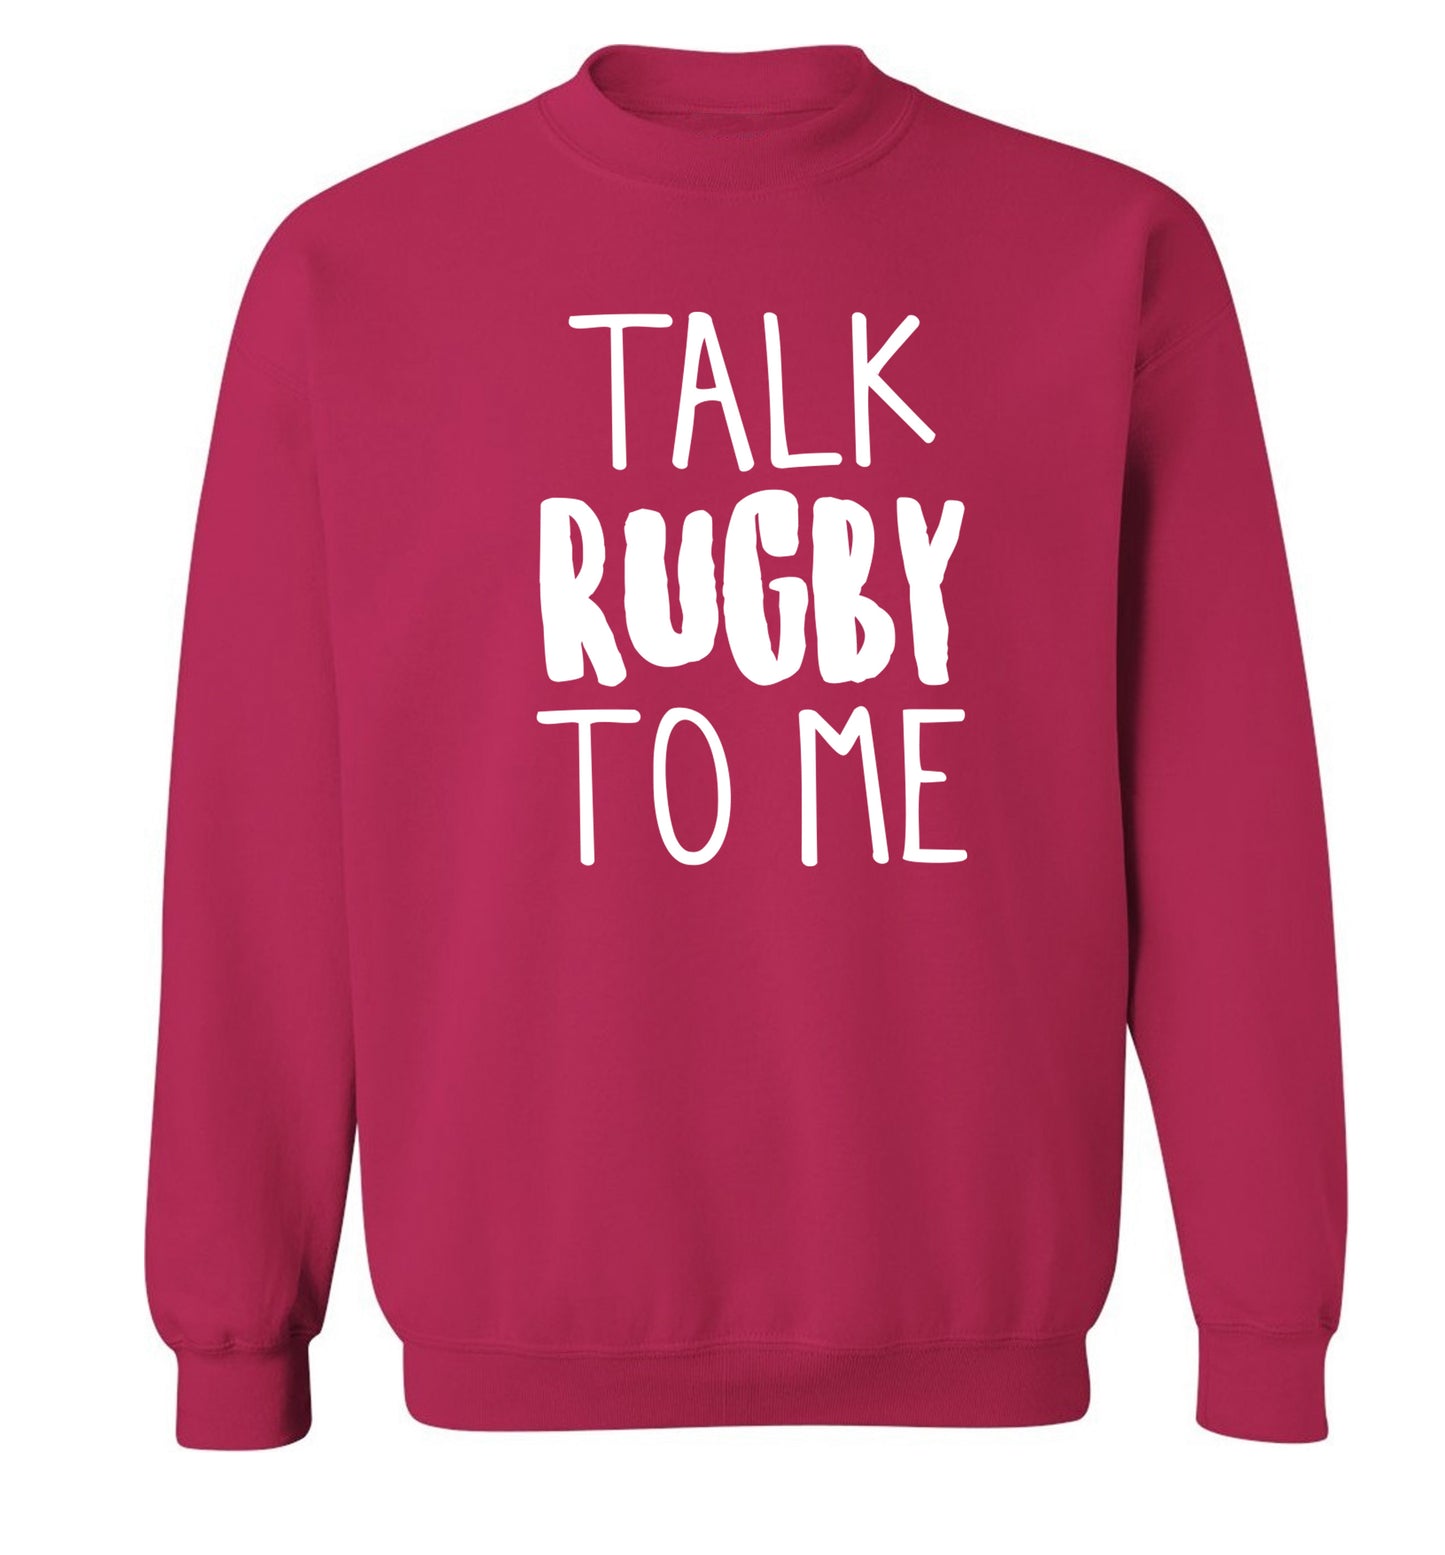 Talk rugby to me Adult's unisex pink Sweater 2XL